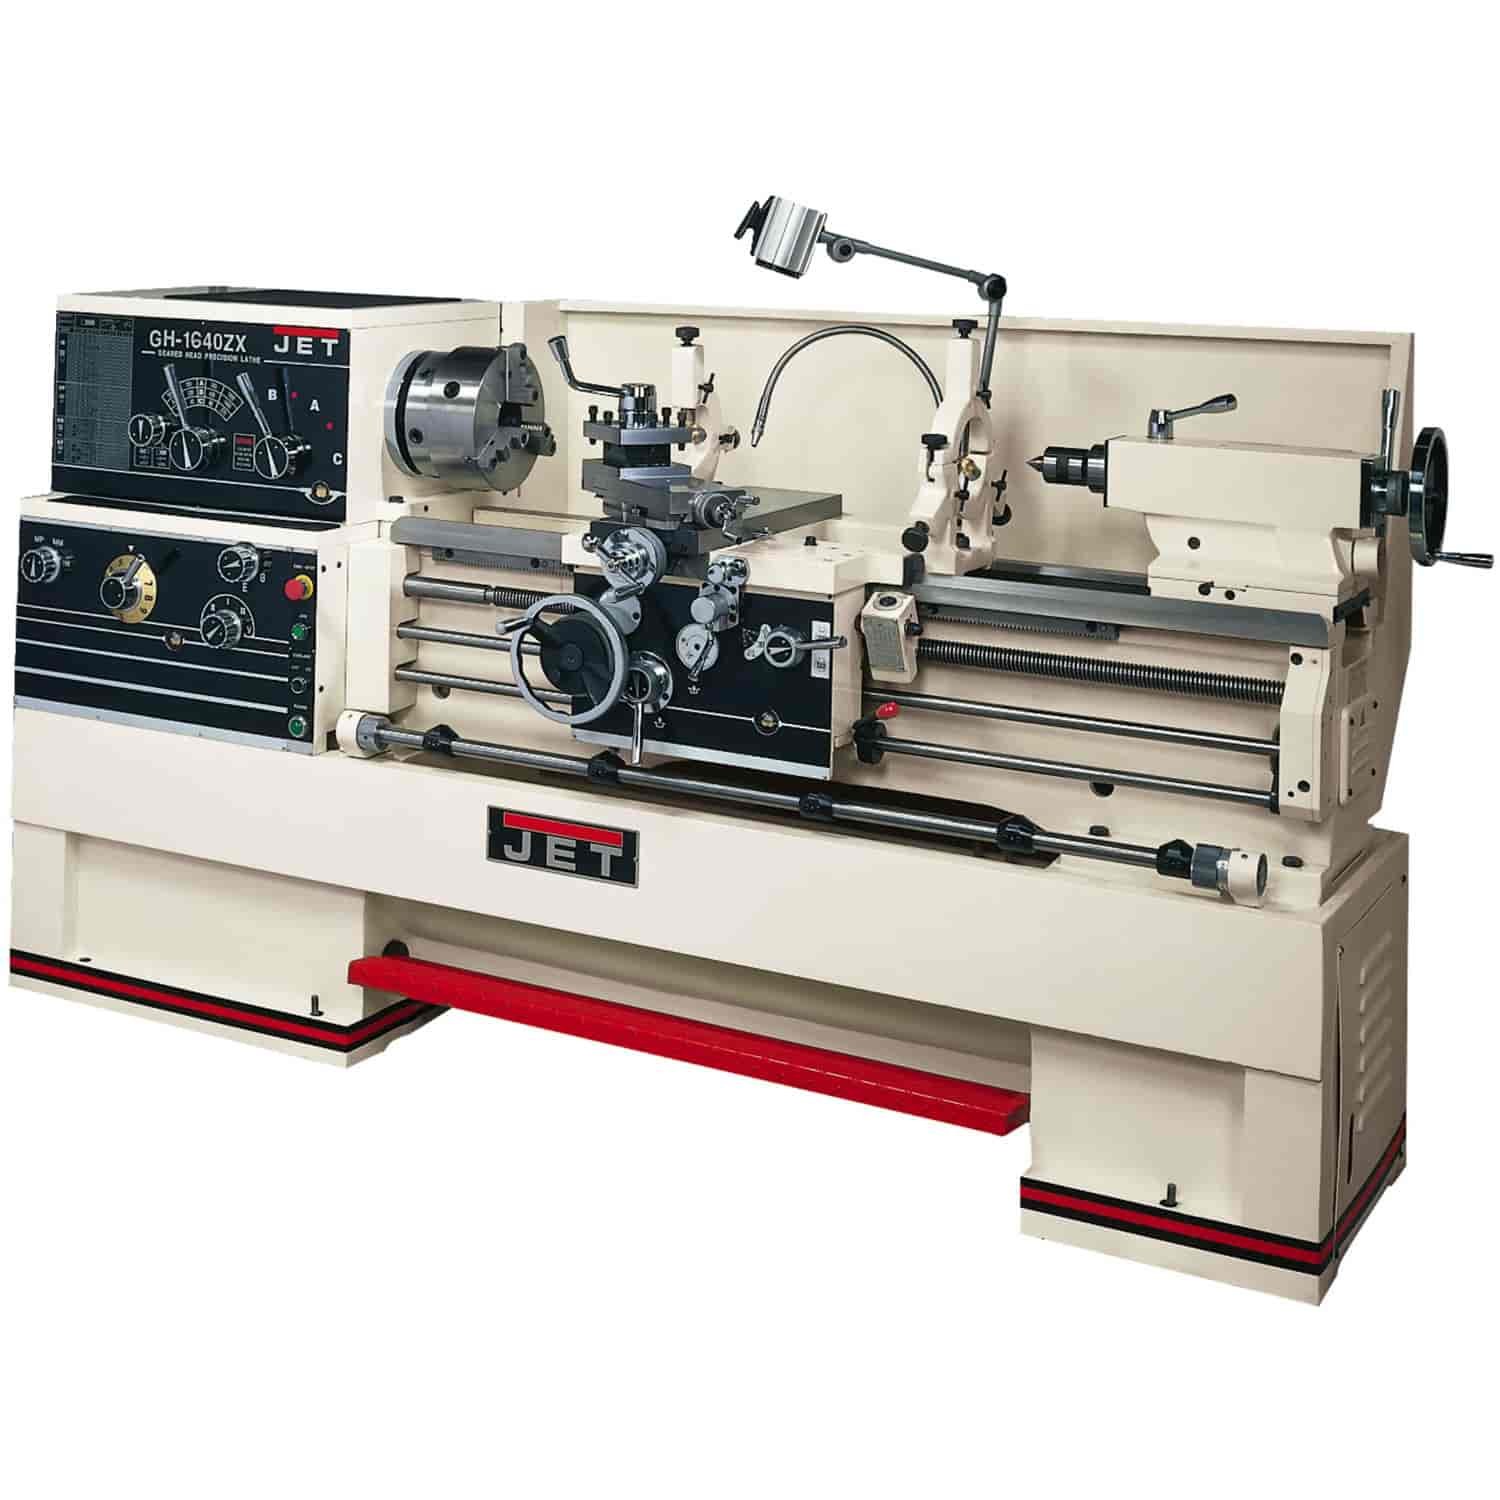 GH-1640ZX 3-1/8 Spindle Bore Geared Head Lathe